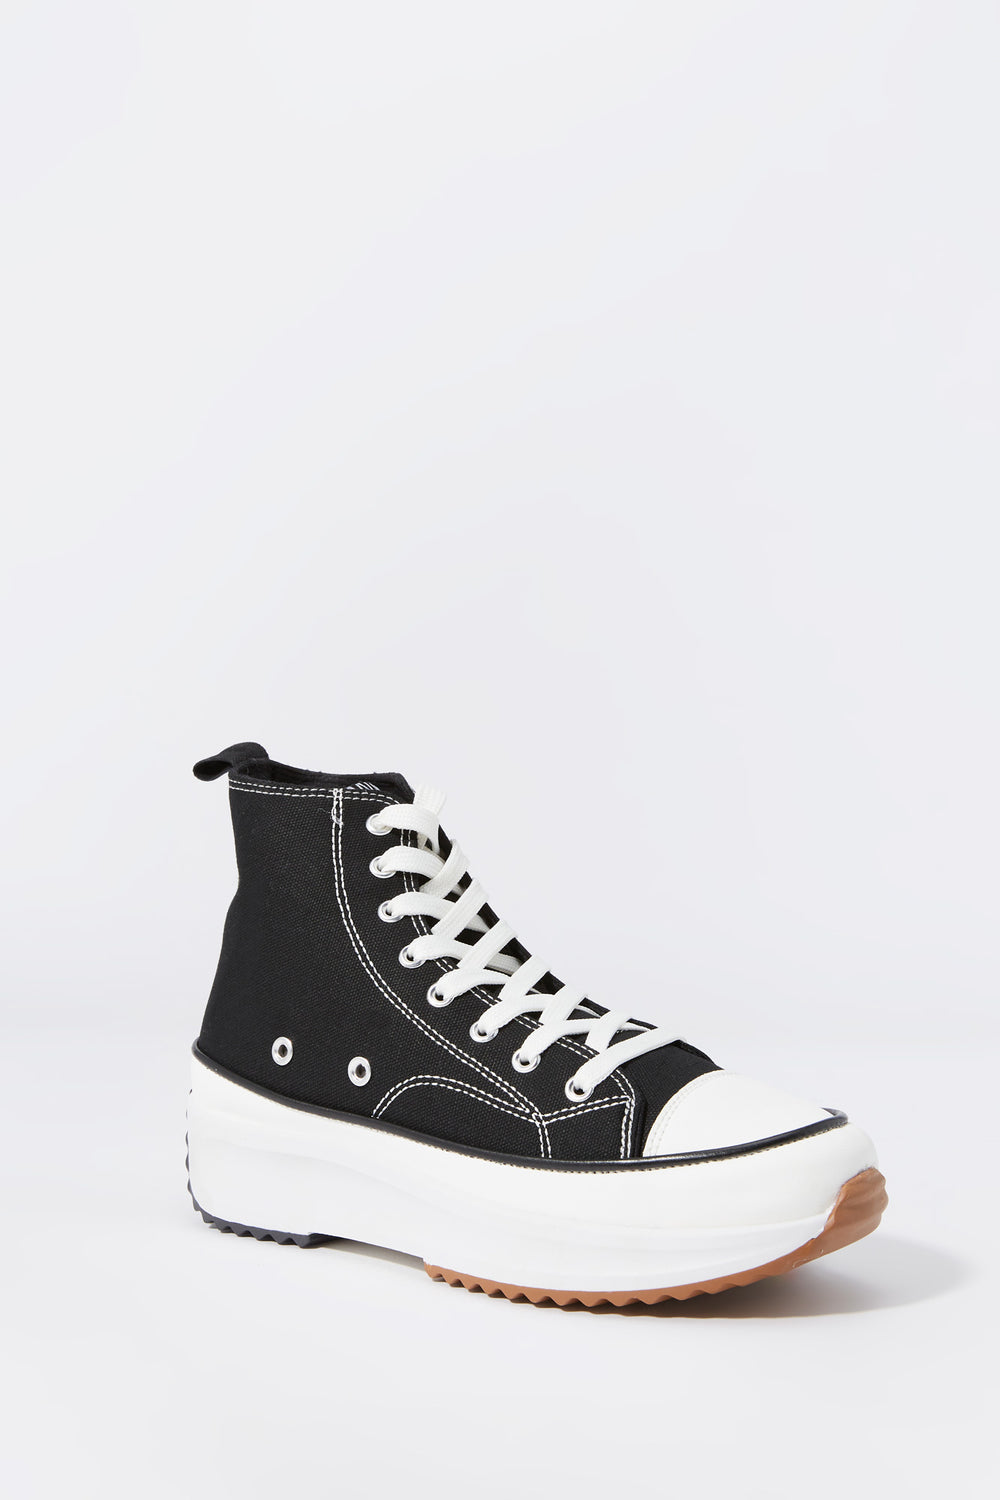 Spiked Sole Lace-Up High Top Sneaker Spiked Sole Lace-Up High Top Sneaker 3